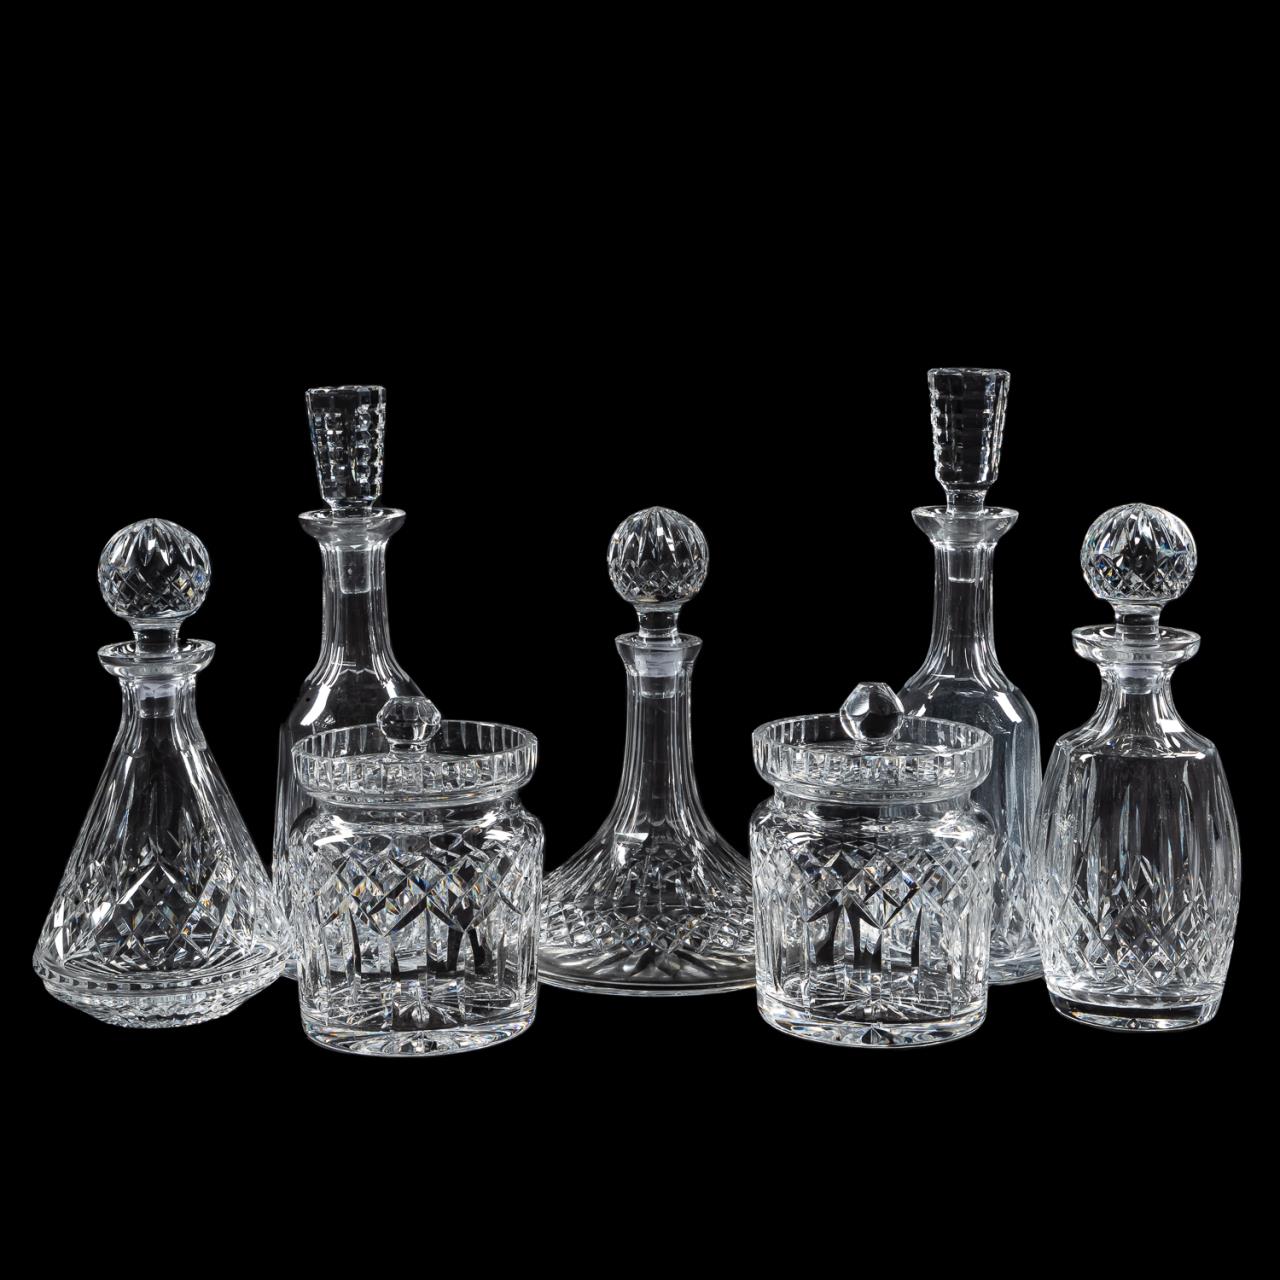 WATERFORD CRYSTAL DECANTERS & BISCUIT